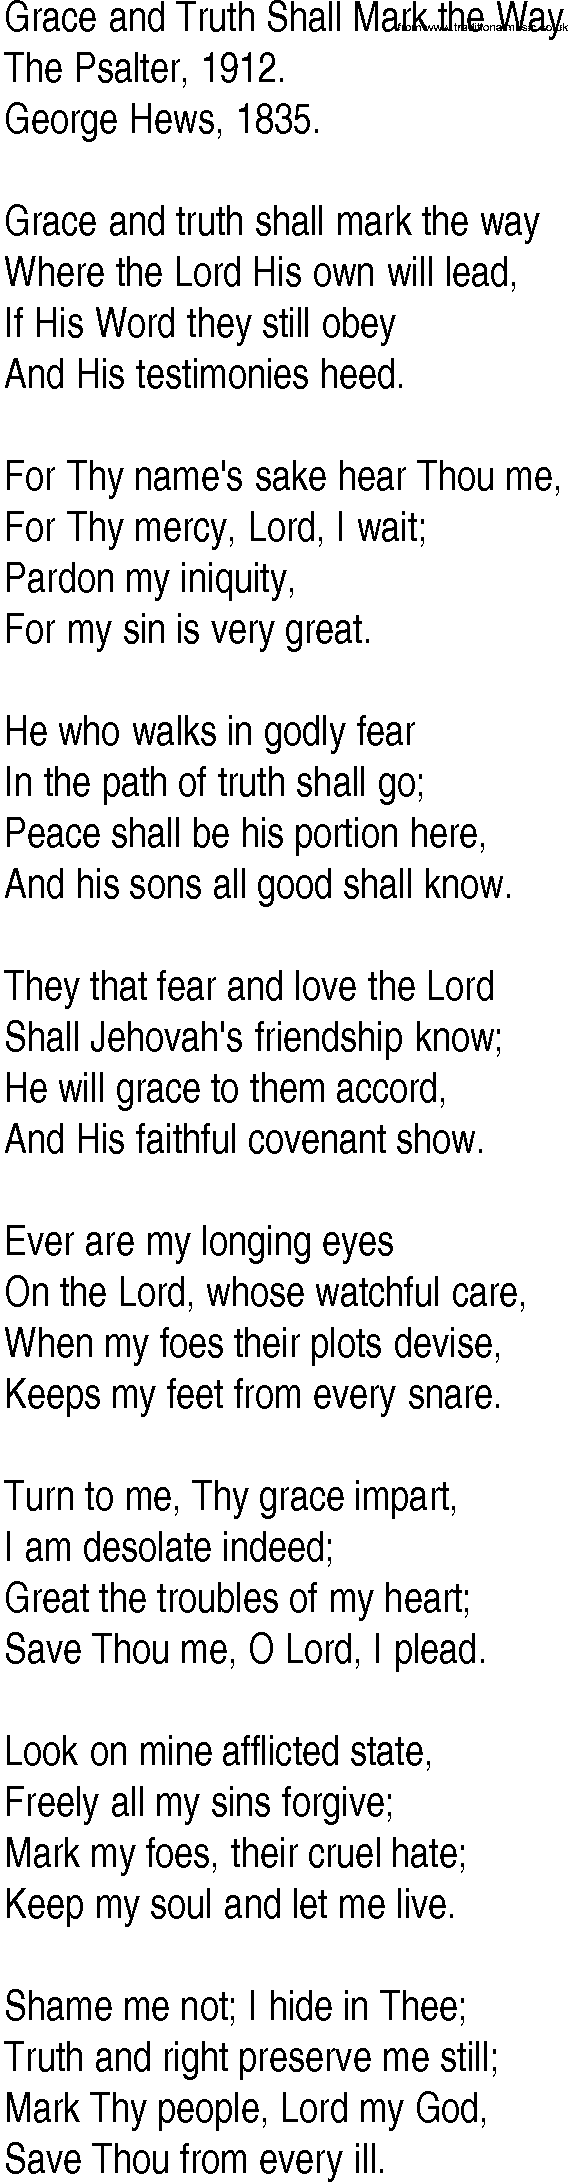 Hymn and Gospel Song: Grace and Truth Shall Mark the Way by The Psalter lyrics